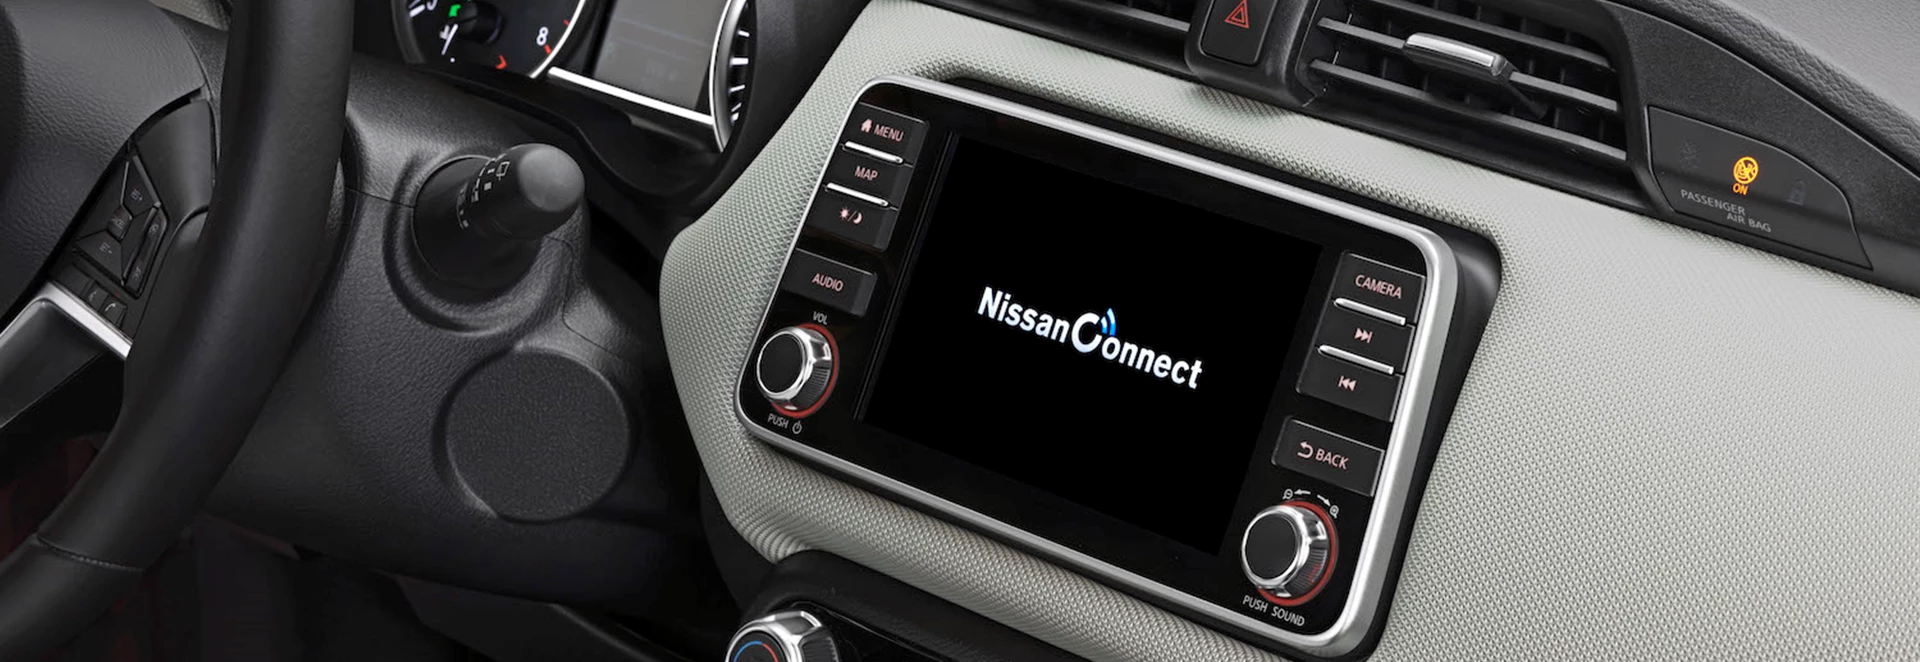 What is NissanConnect?